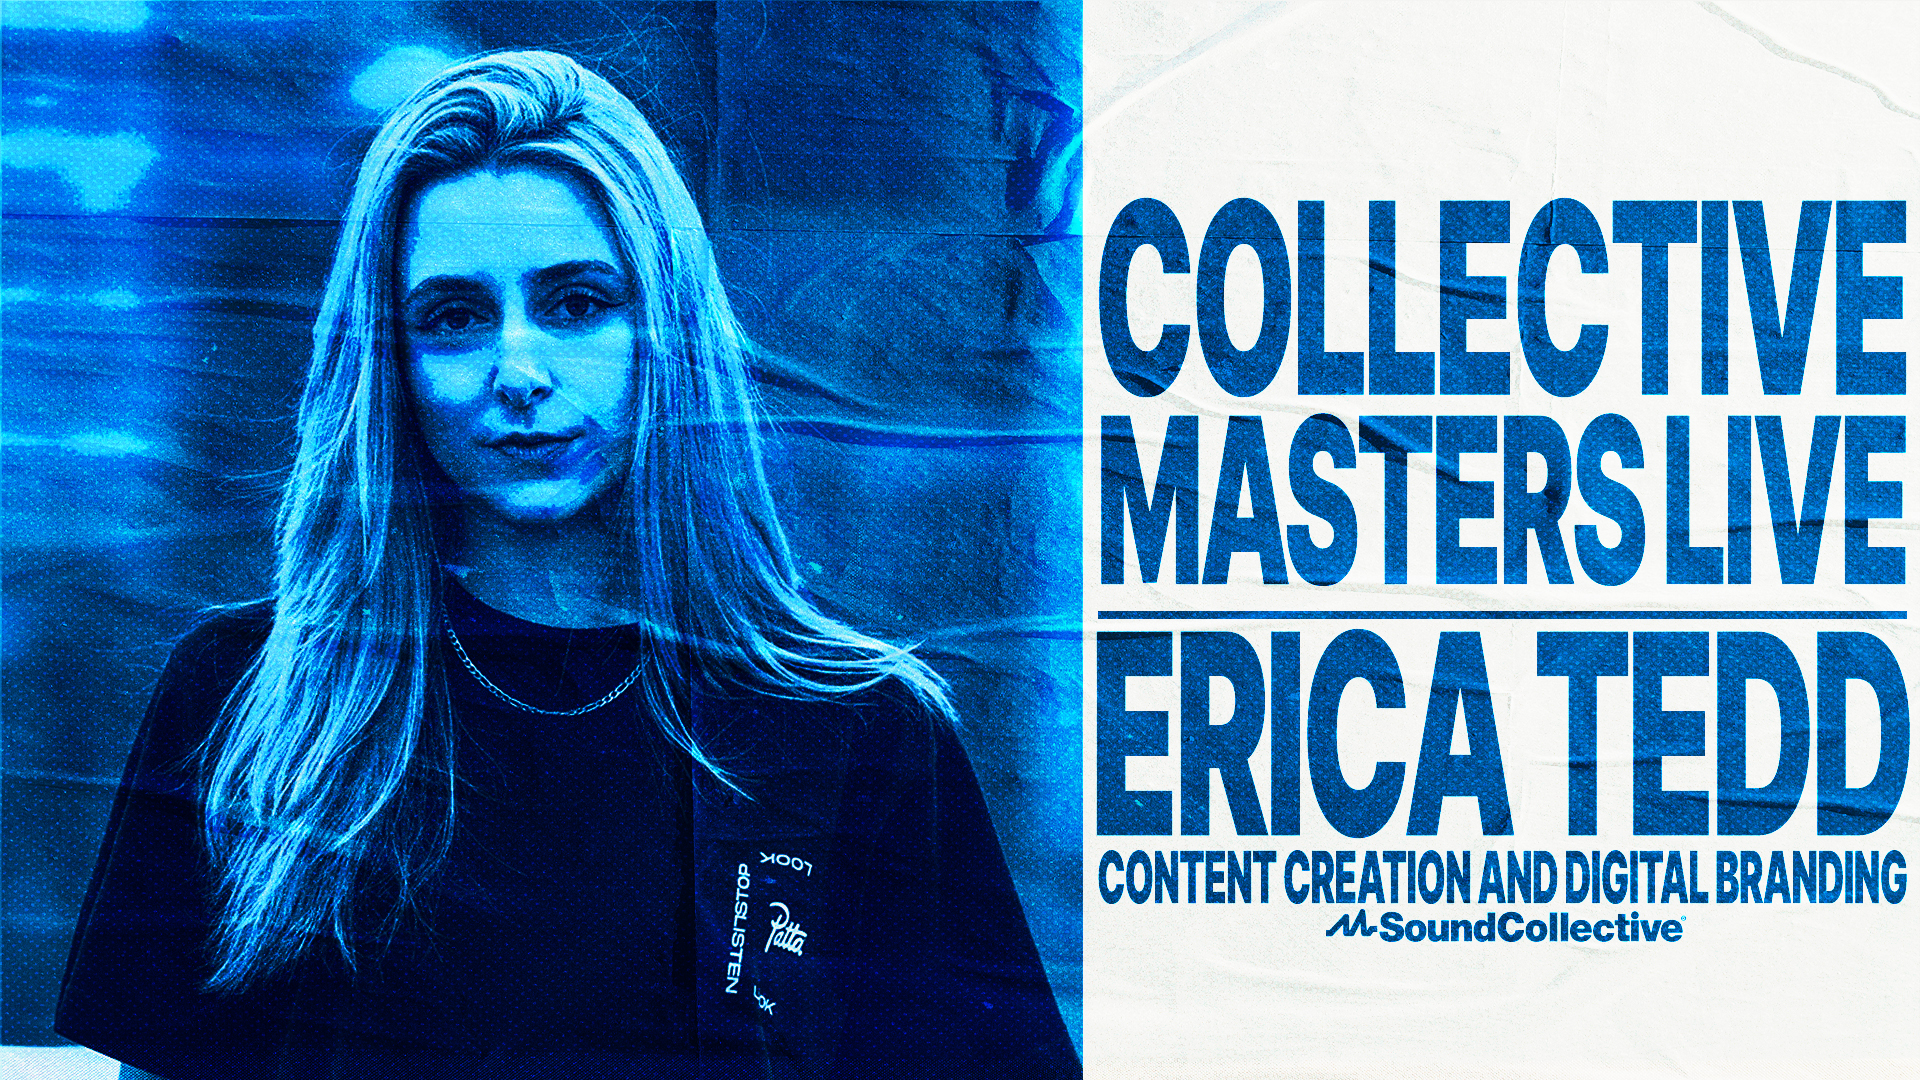 Collective Masters Live with Erica Tedd: Content Creation and Digital Branding